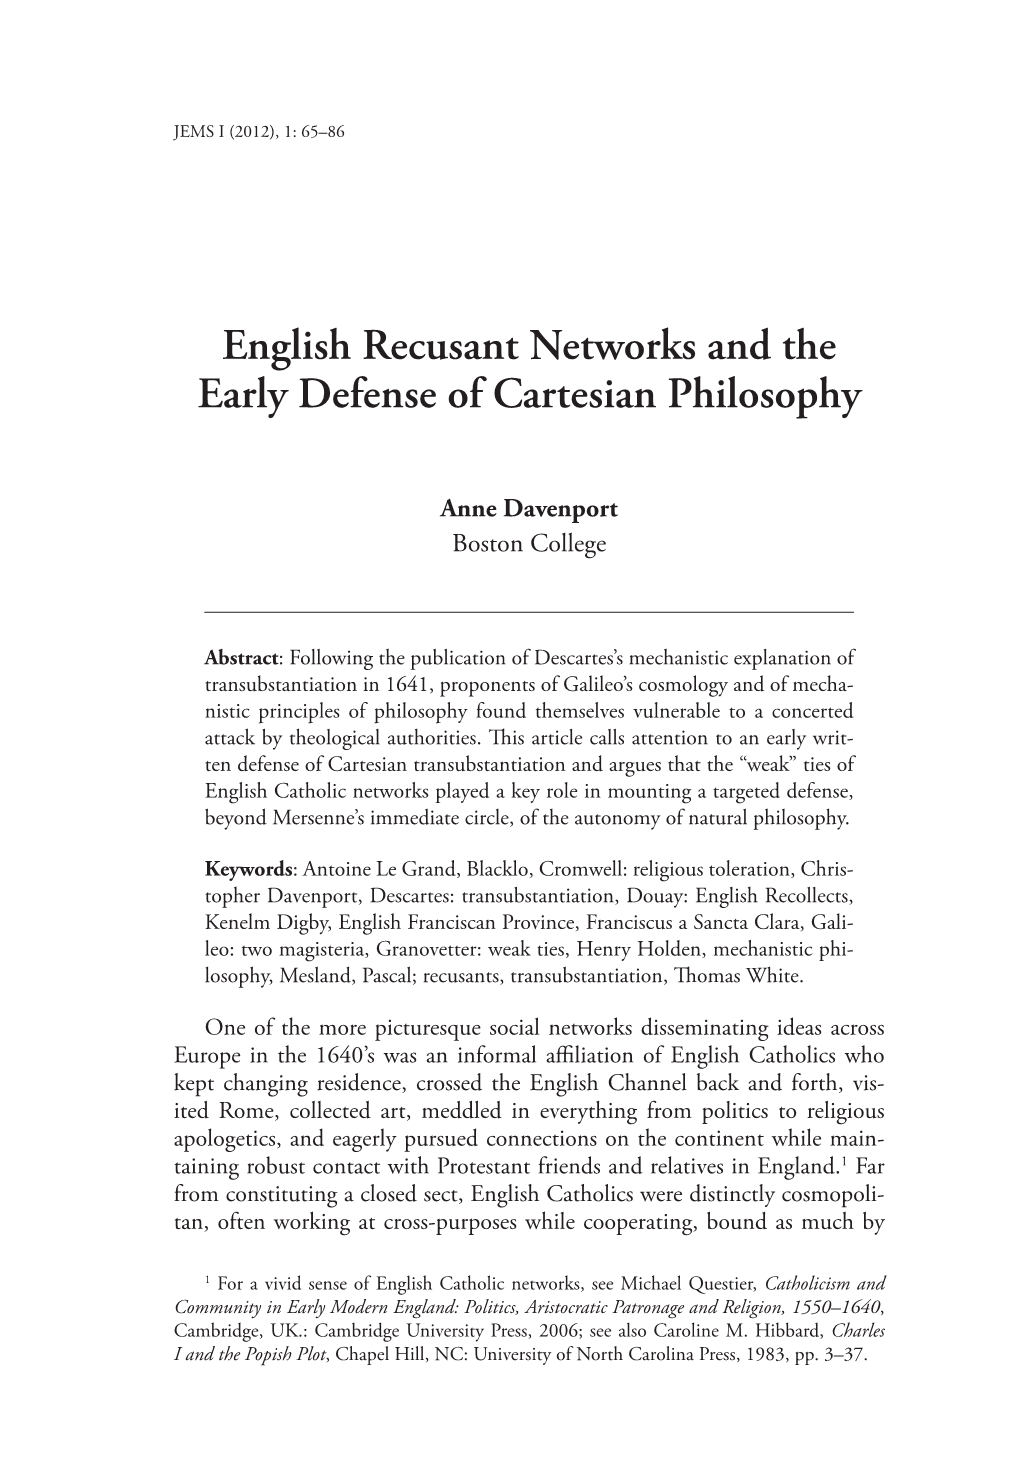 English Recusant Networks and the Early Defense of Cartesian Philosophy